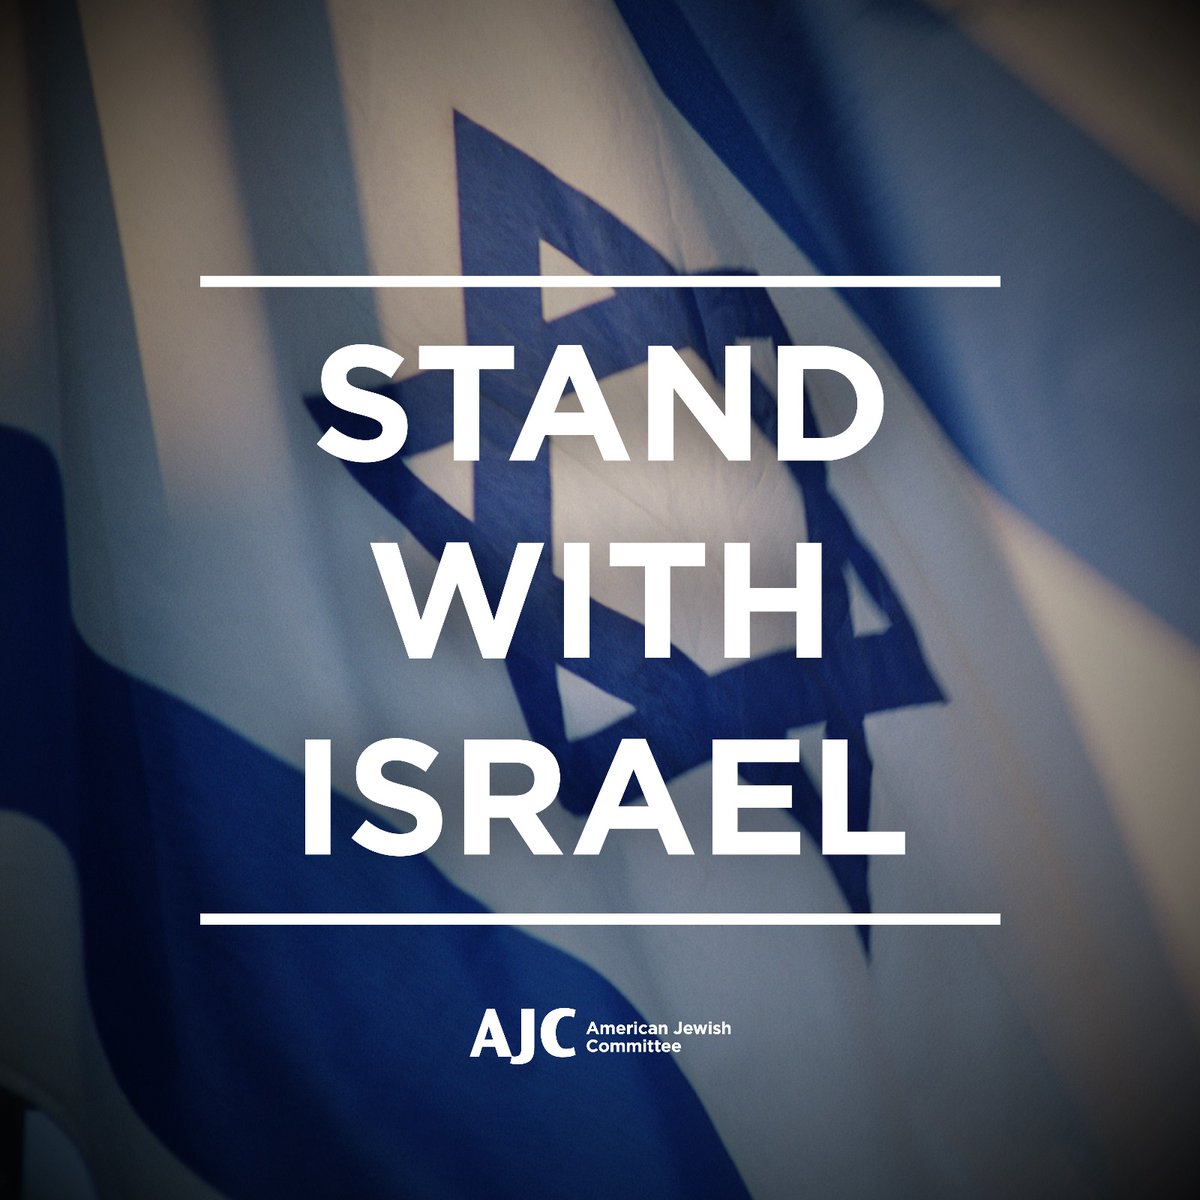 We stand united with the people of Israel and pray for their safety as Iran launches dozens of drones toward the country. We vehemently condemn this act of aggression from Iran and thank the U.S. for their unwavering support for Israel during this critical time.